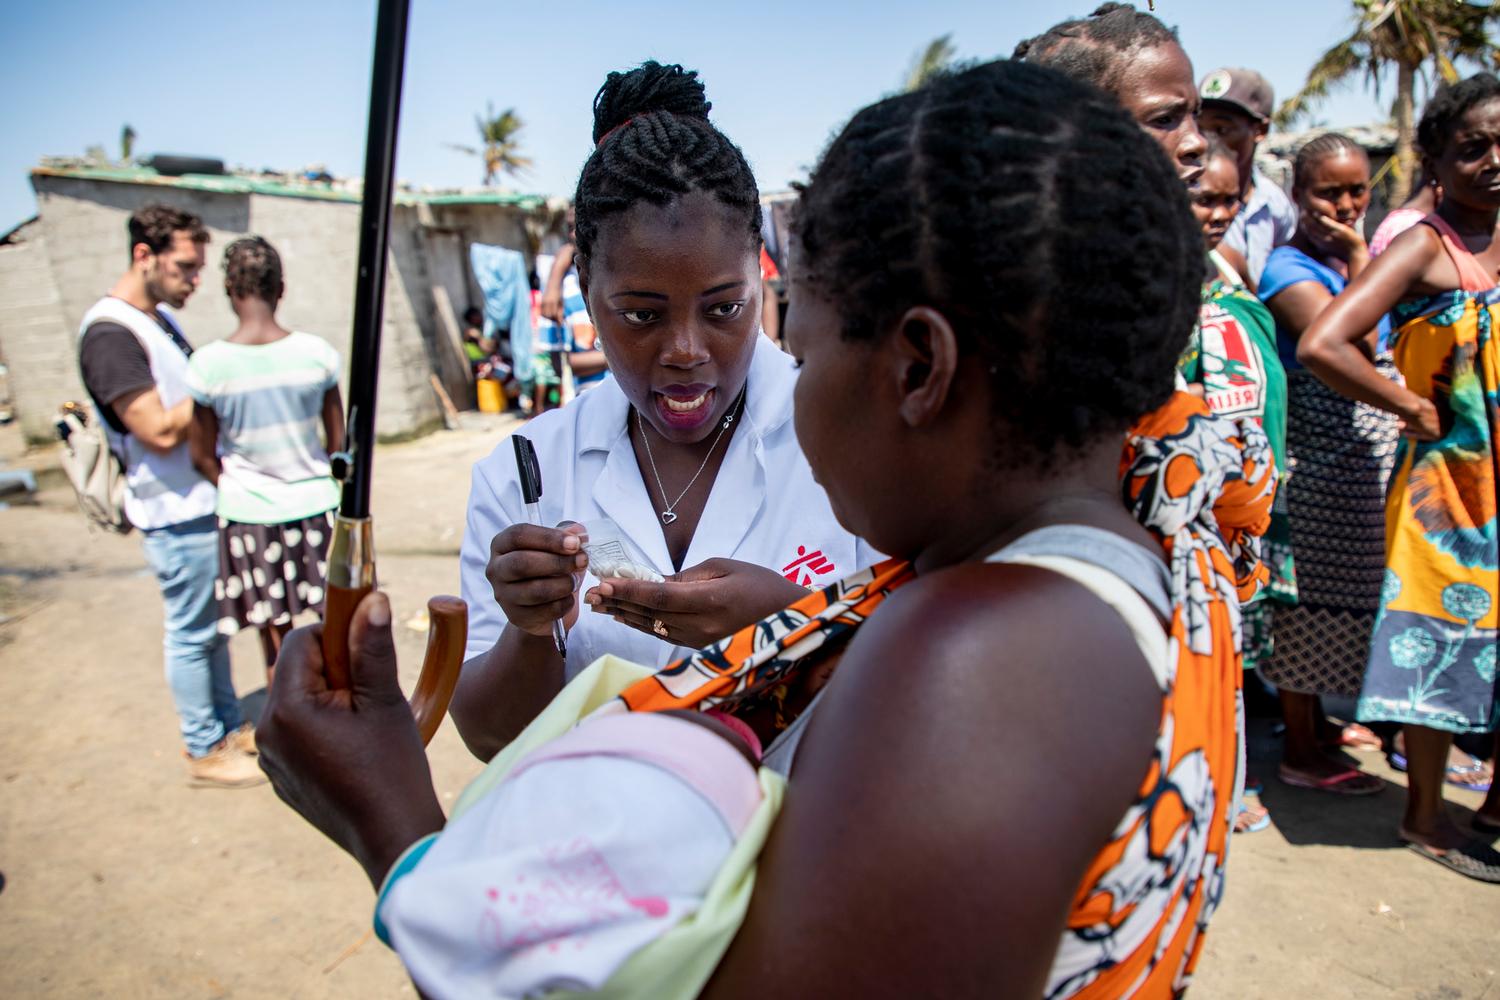 A nurse gives medication to a woman with her child at one of MSF’s mobile clinics in Beira, an area hard hit by Cyclone Idai. Mozambique, March 2019. 